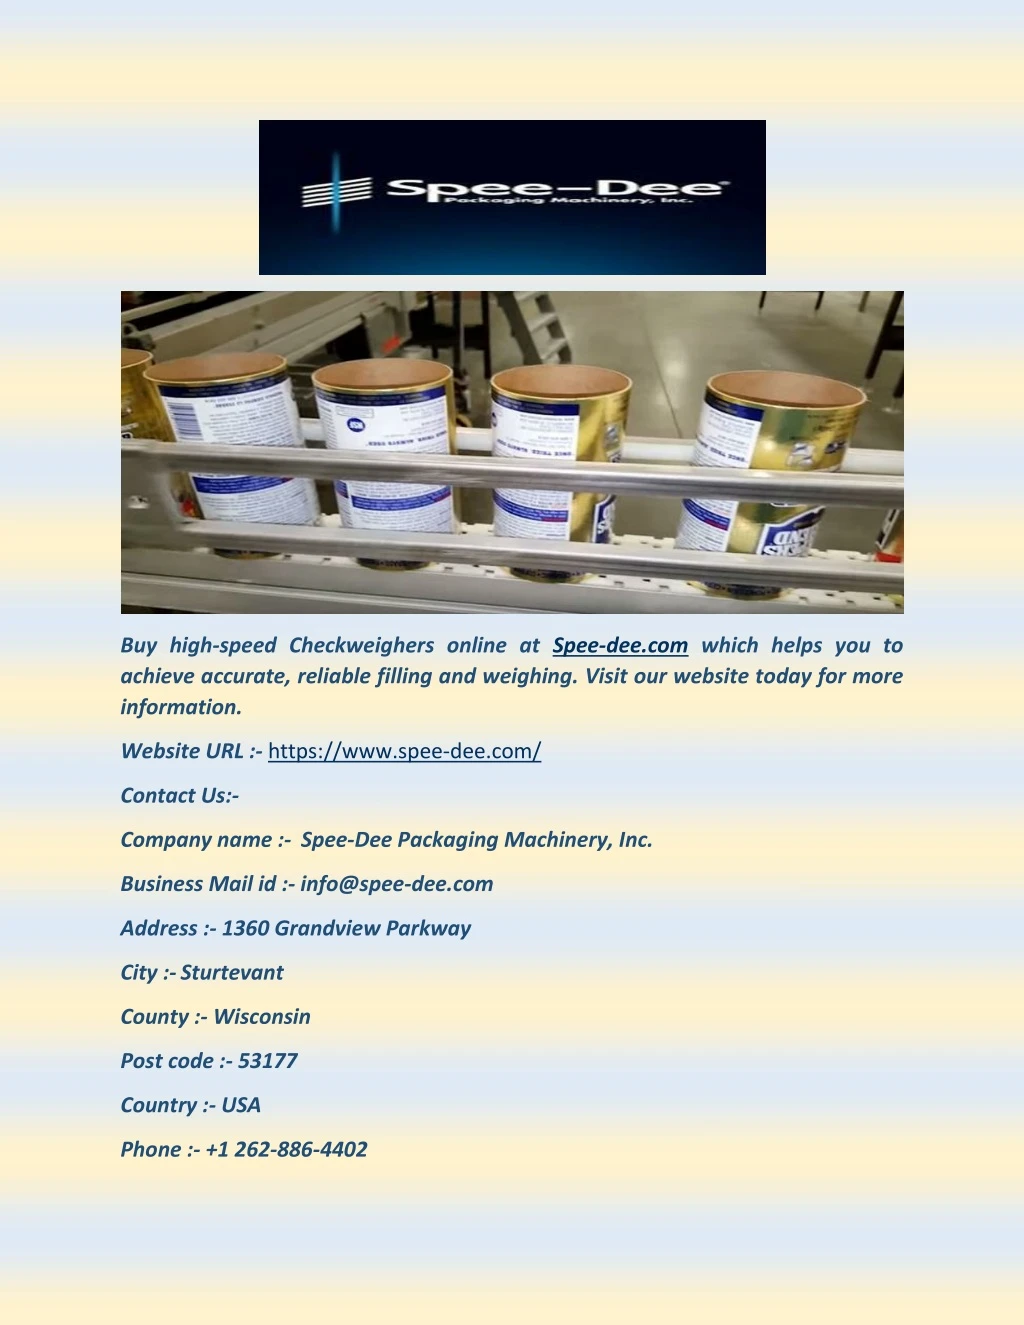 buy high speed checkweighers online at spee